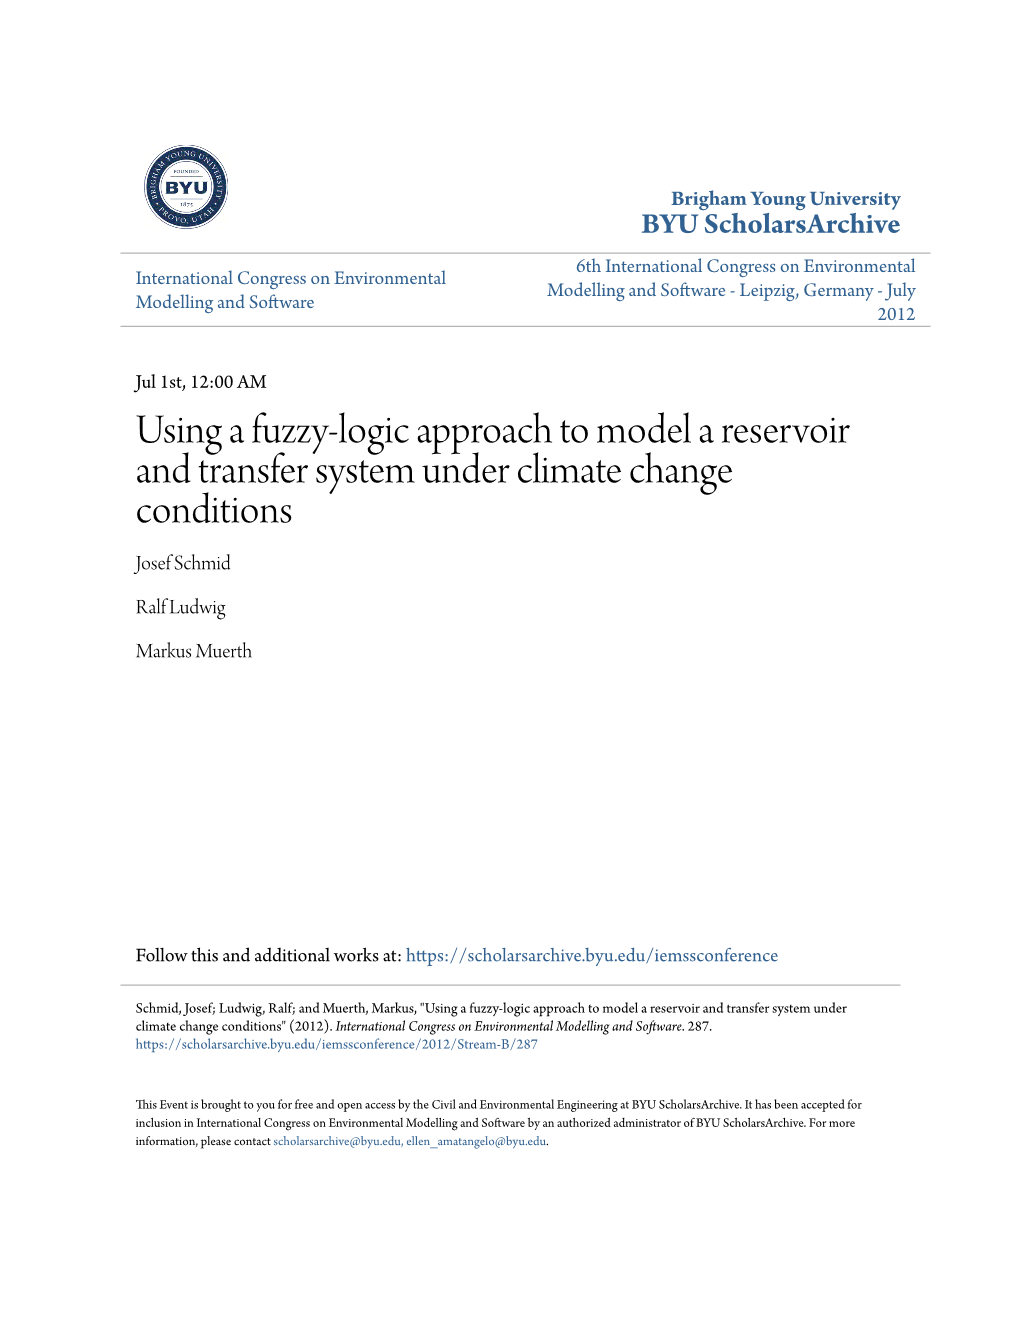 Using a Fuzzy-Logic Approach to Model a Reservoir and Transfer System Under Climate Change Conditions Josef Schmid